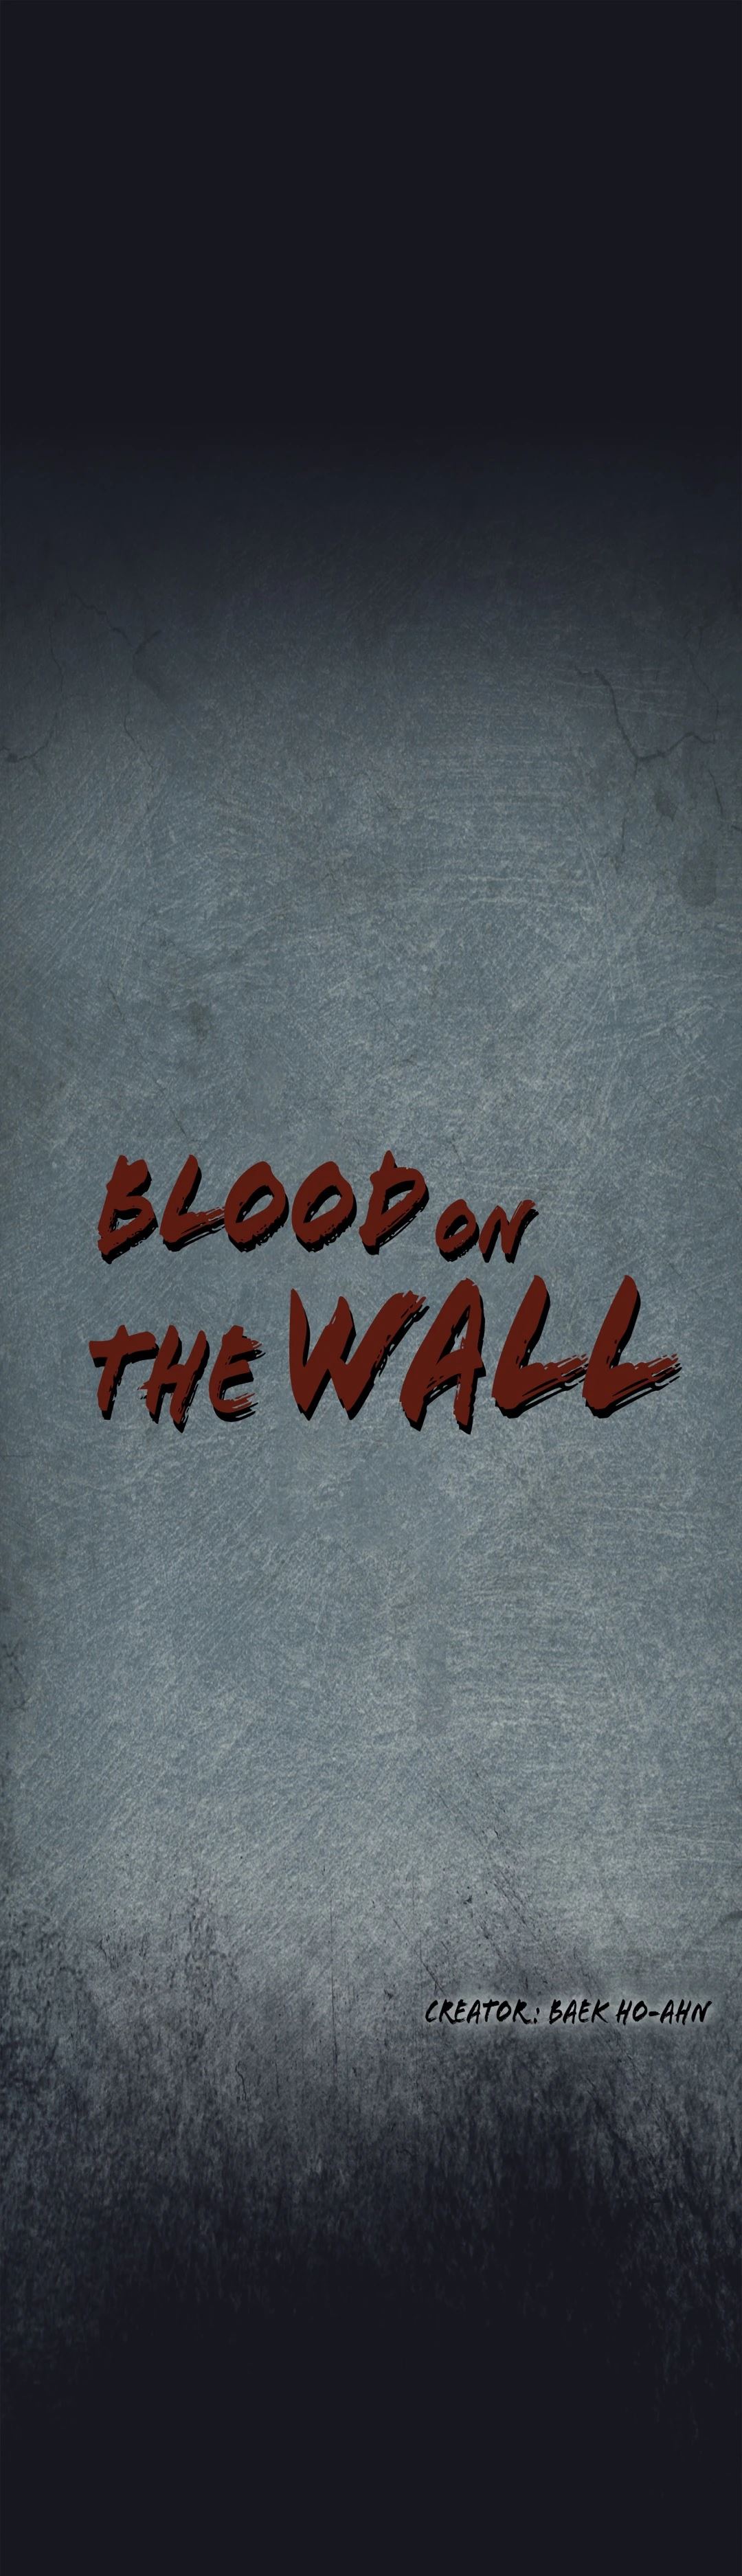 Blood on the wall image